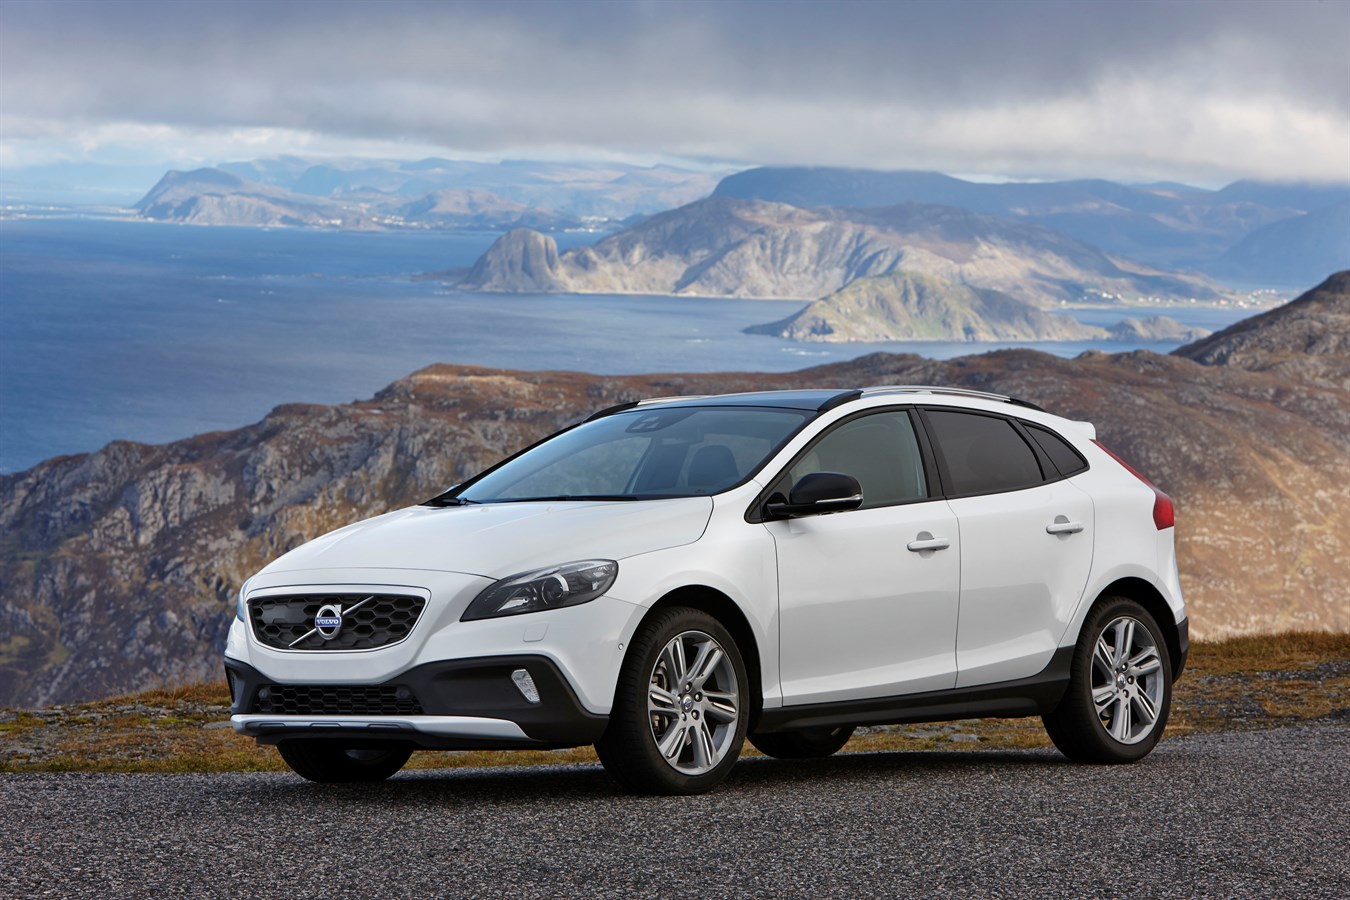 Amazing Volvo V40 Pictures & Backgrounds